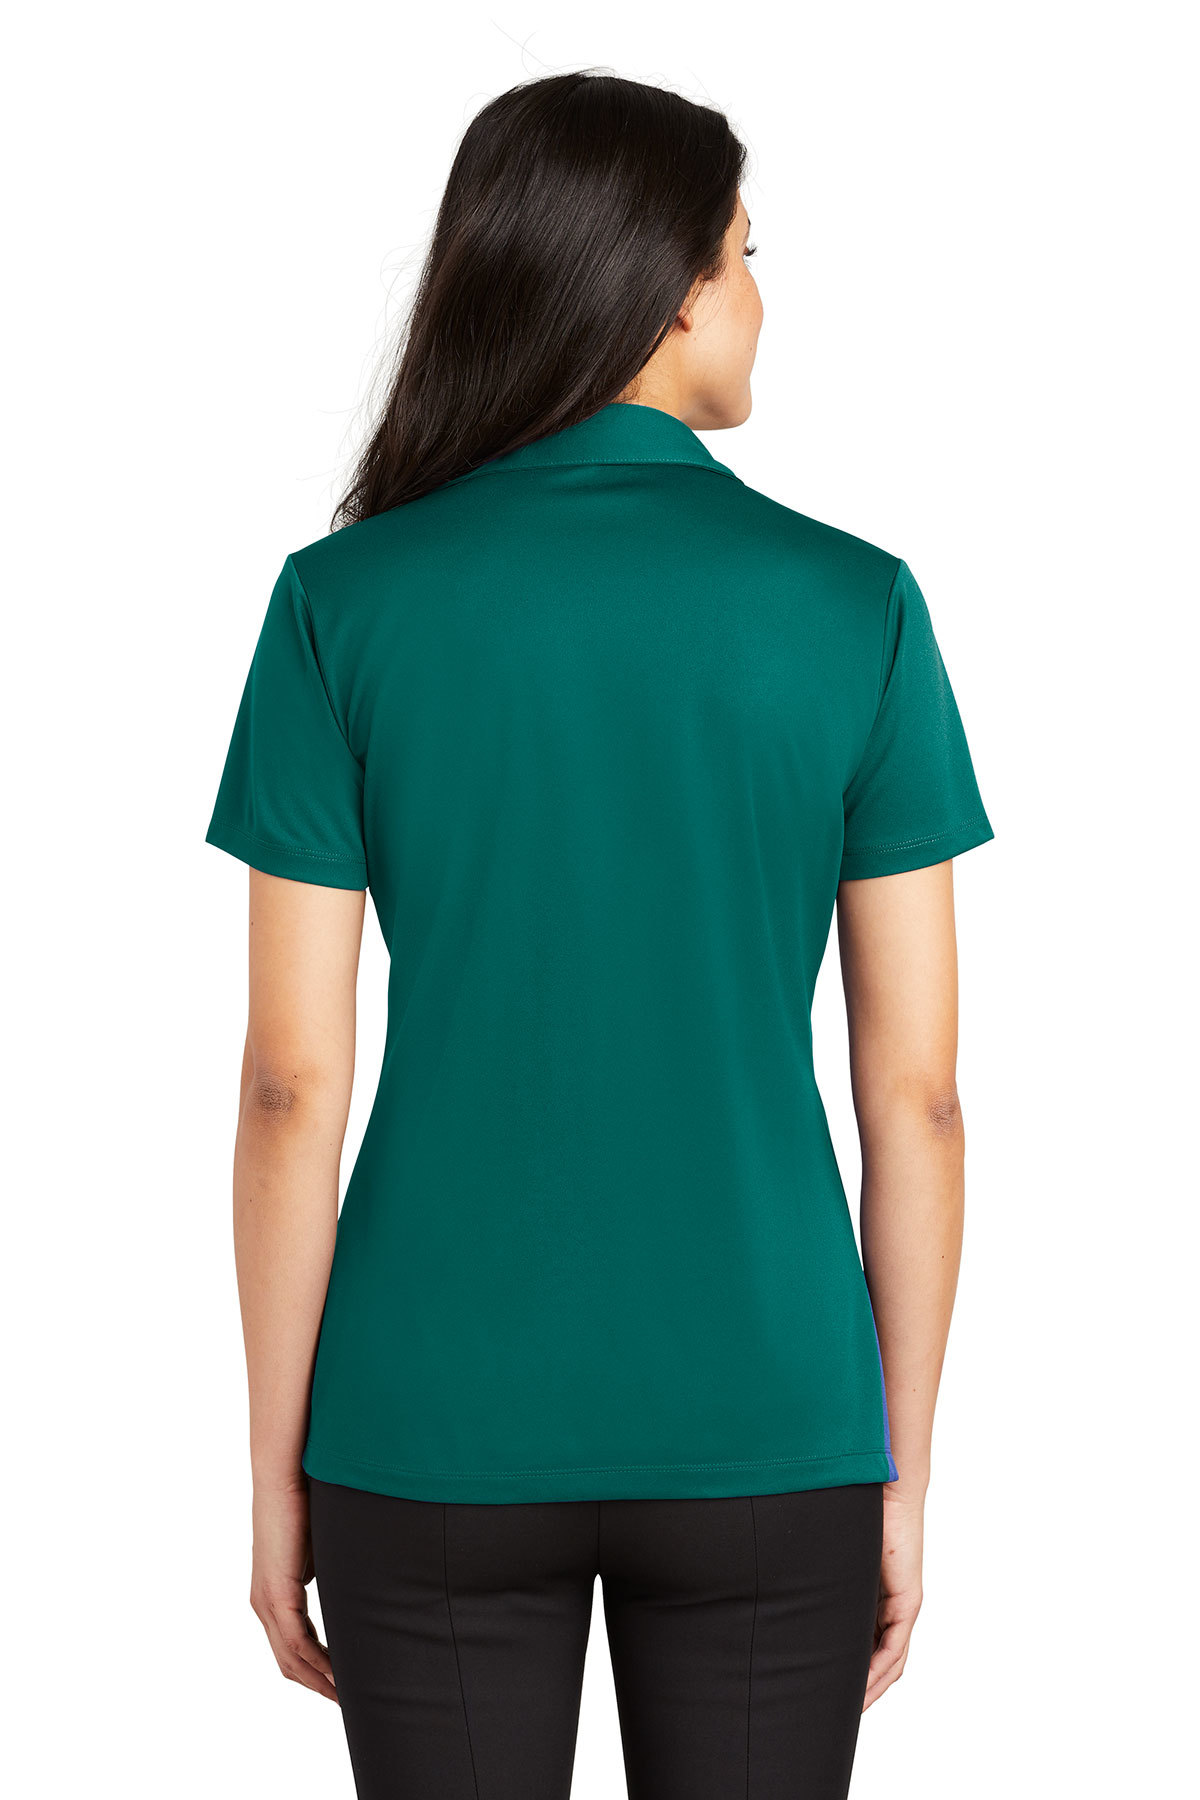 L540 Teal Green Port Authority Ladies Silk Touch153; Performance Polo